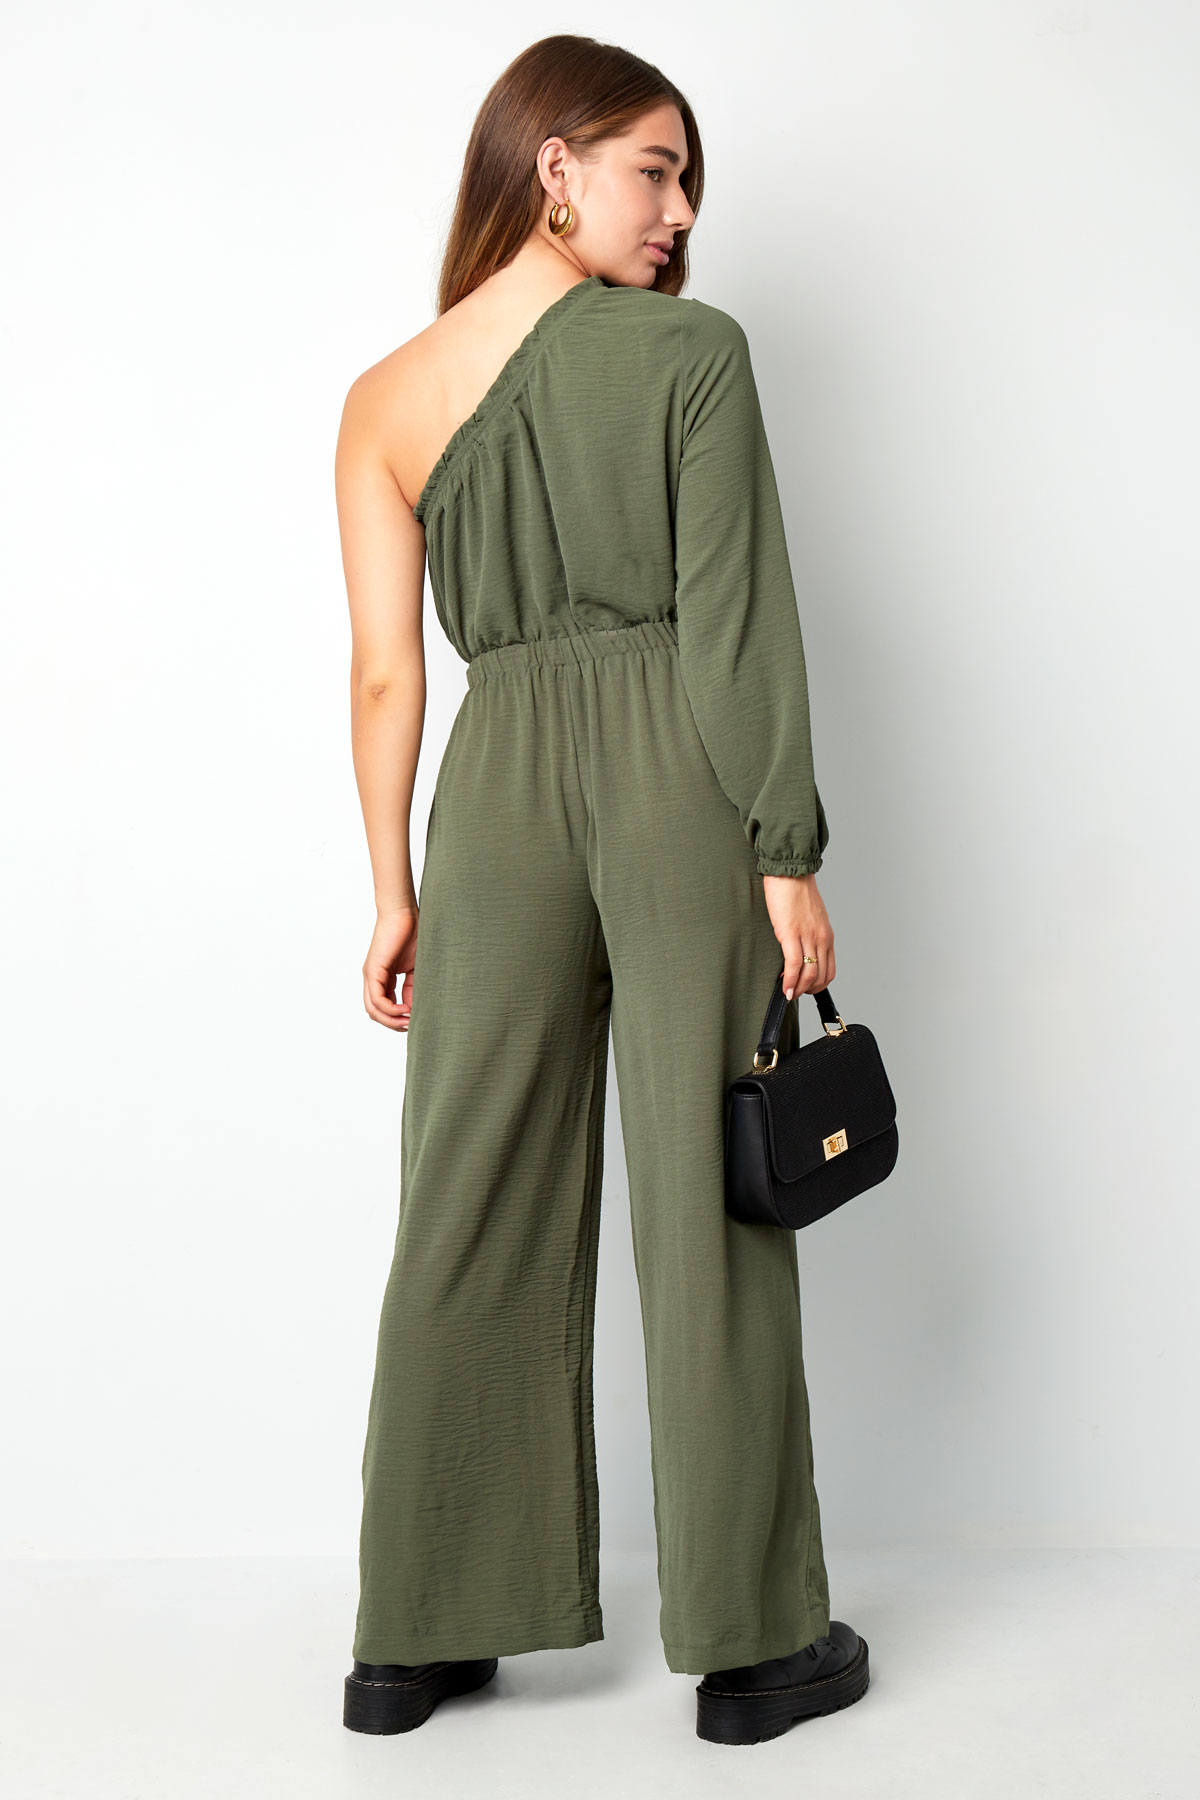 Jumpsuit one-shoulder - mustard yellow Picture9